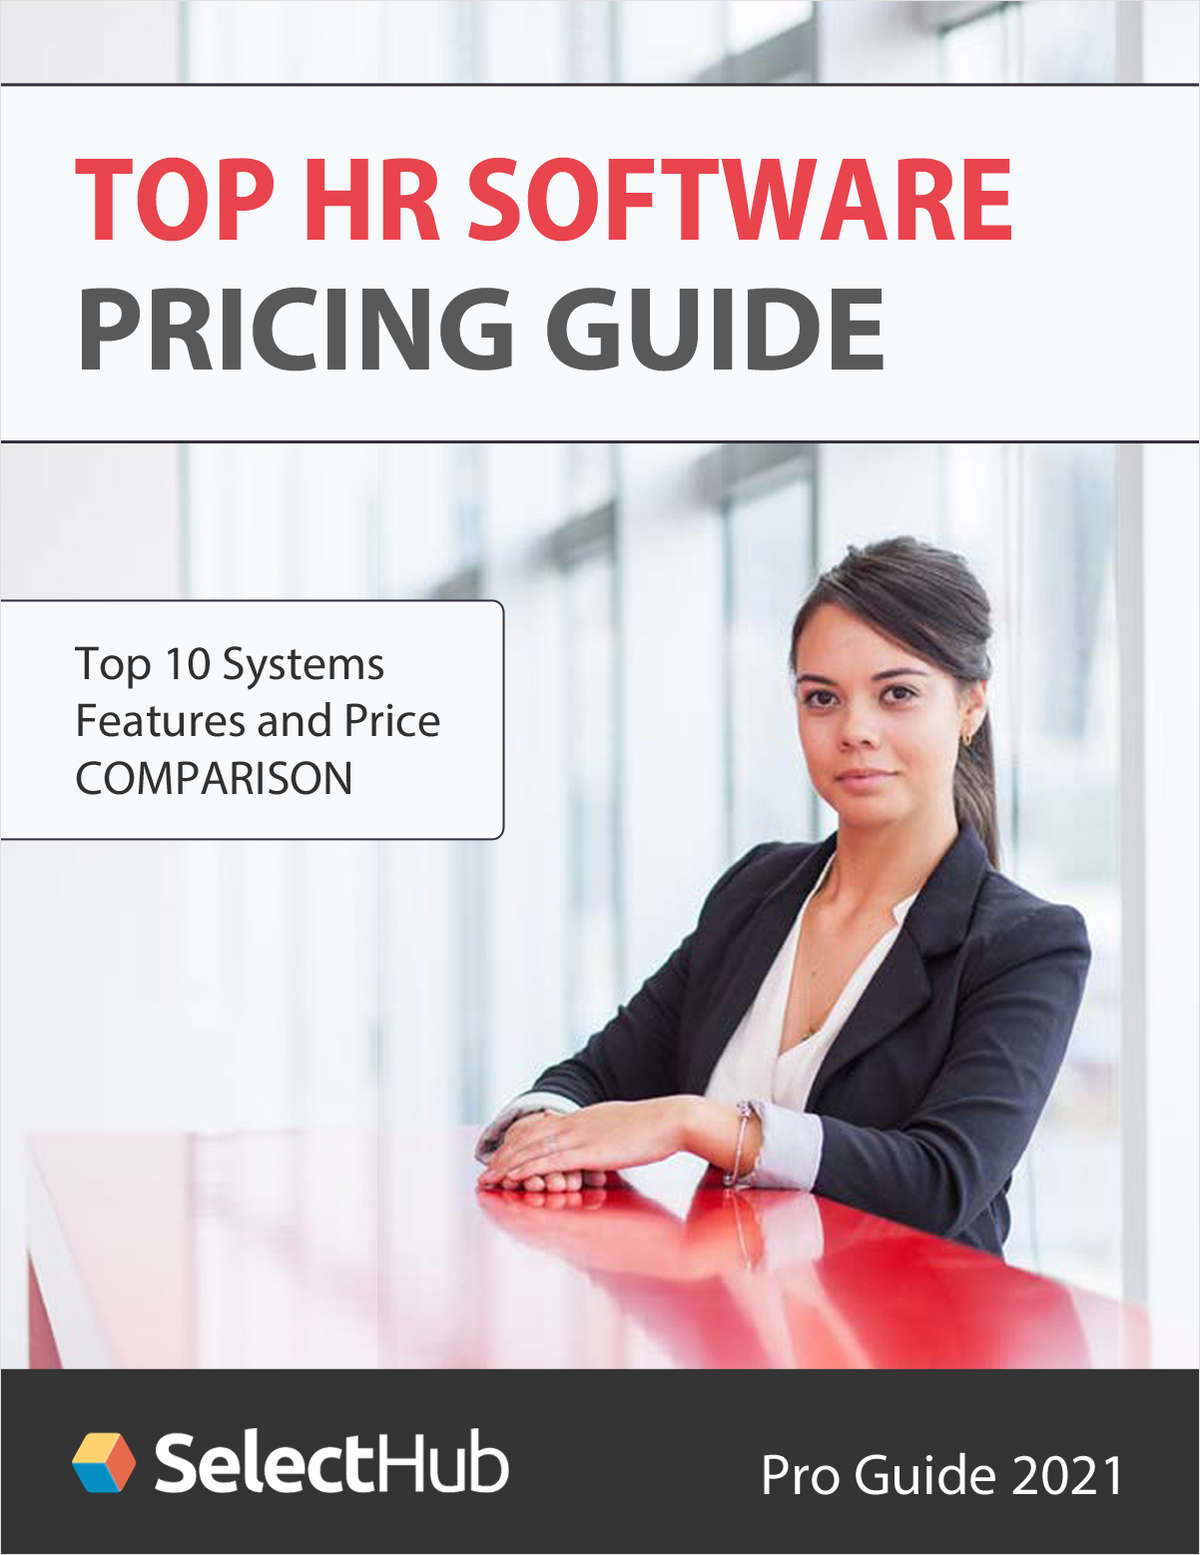 Top 10 HR Software Pricing Guide 2021